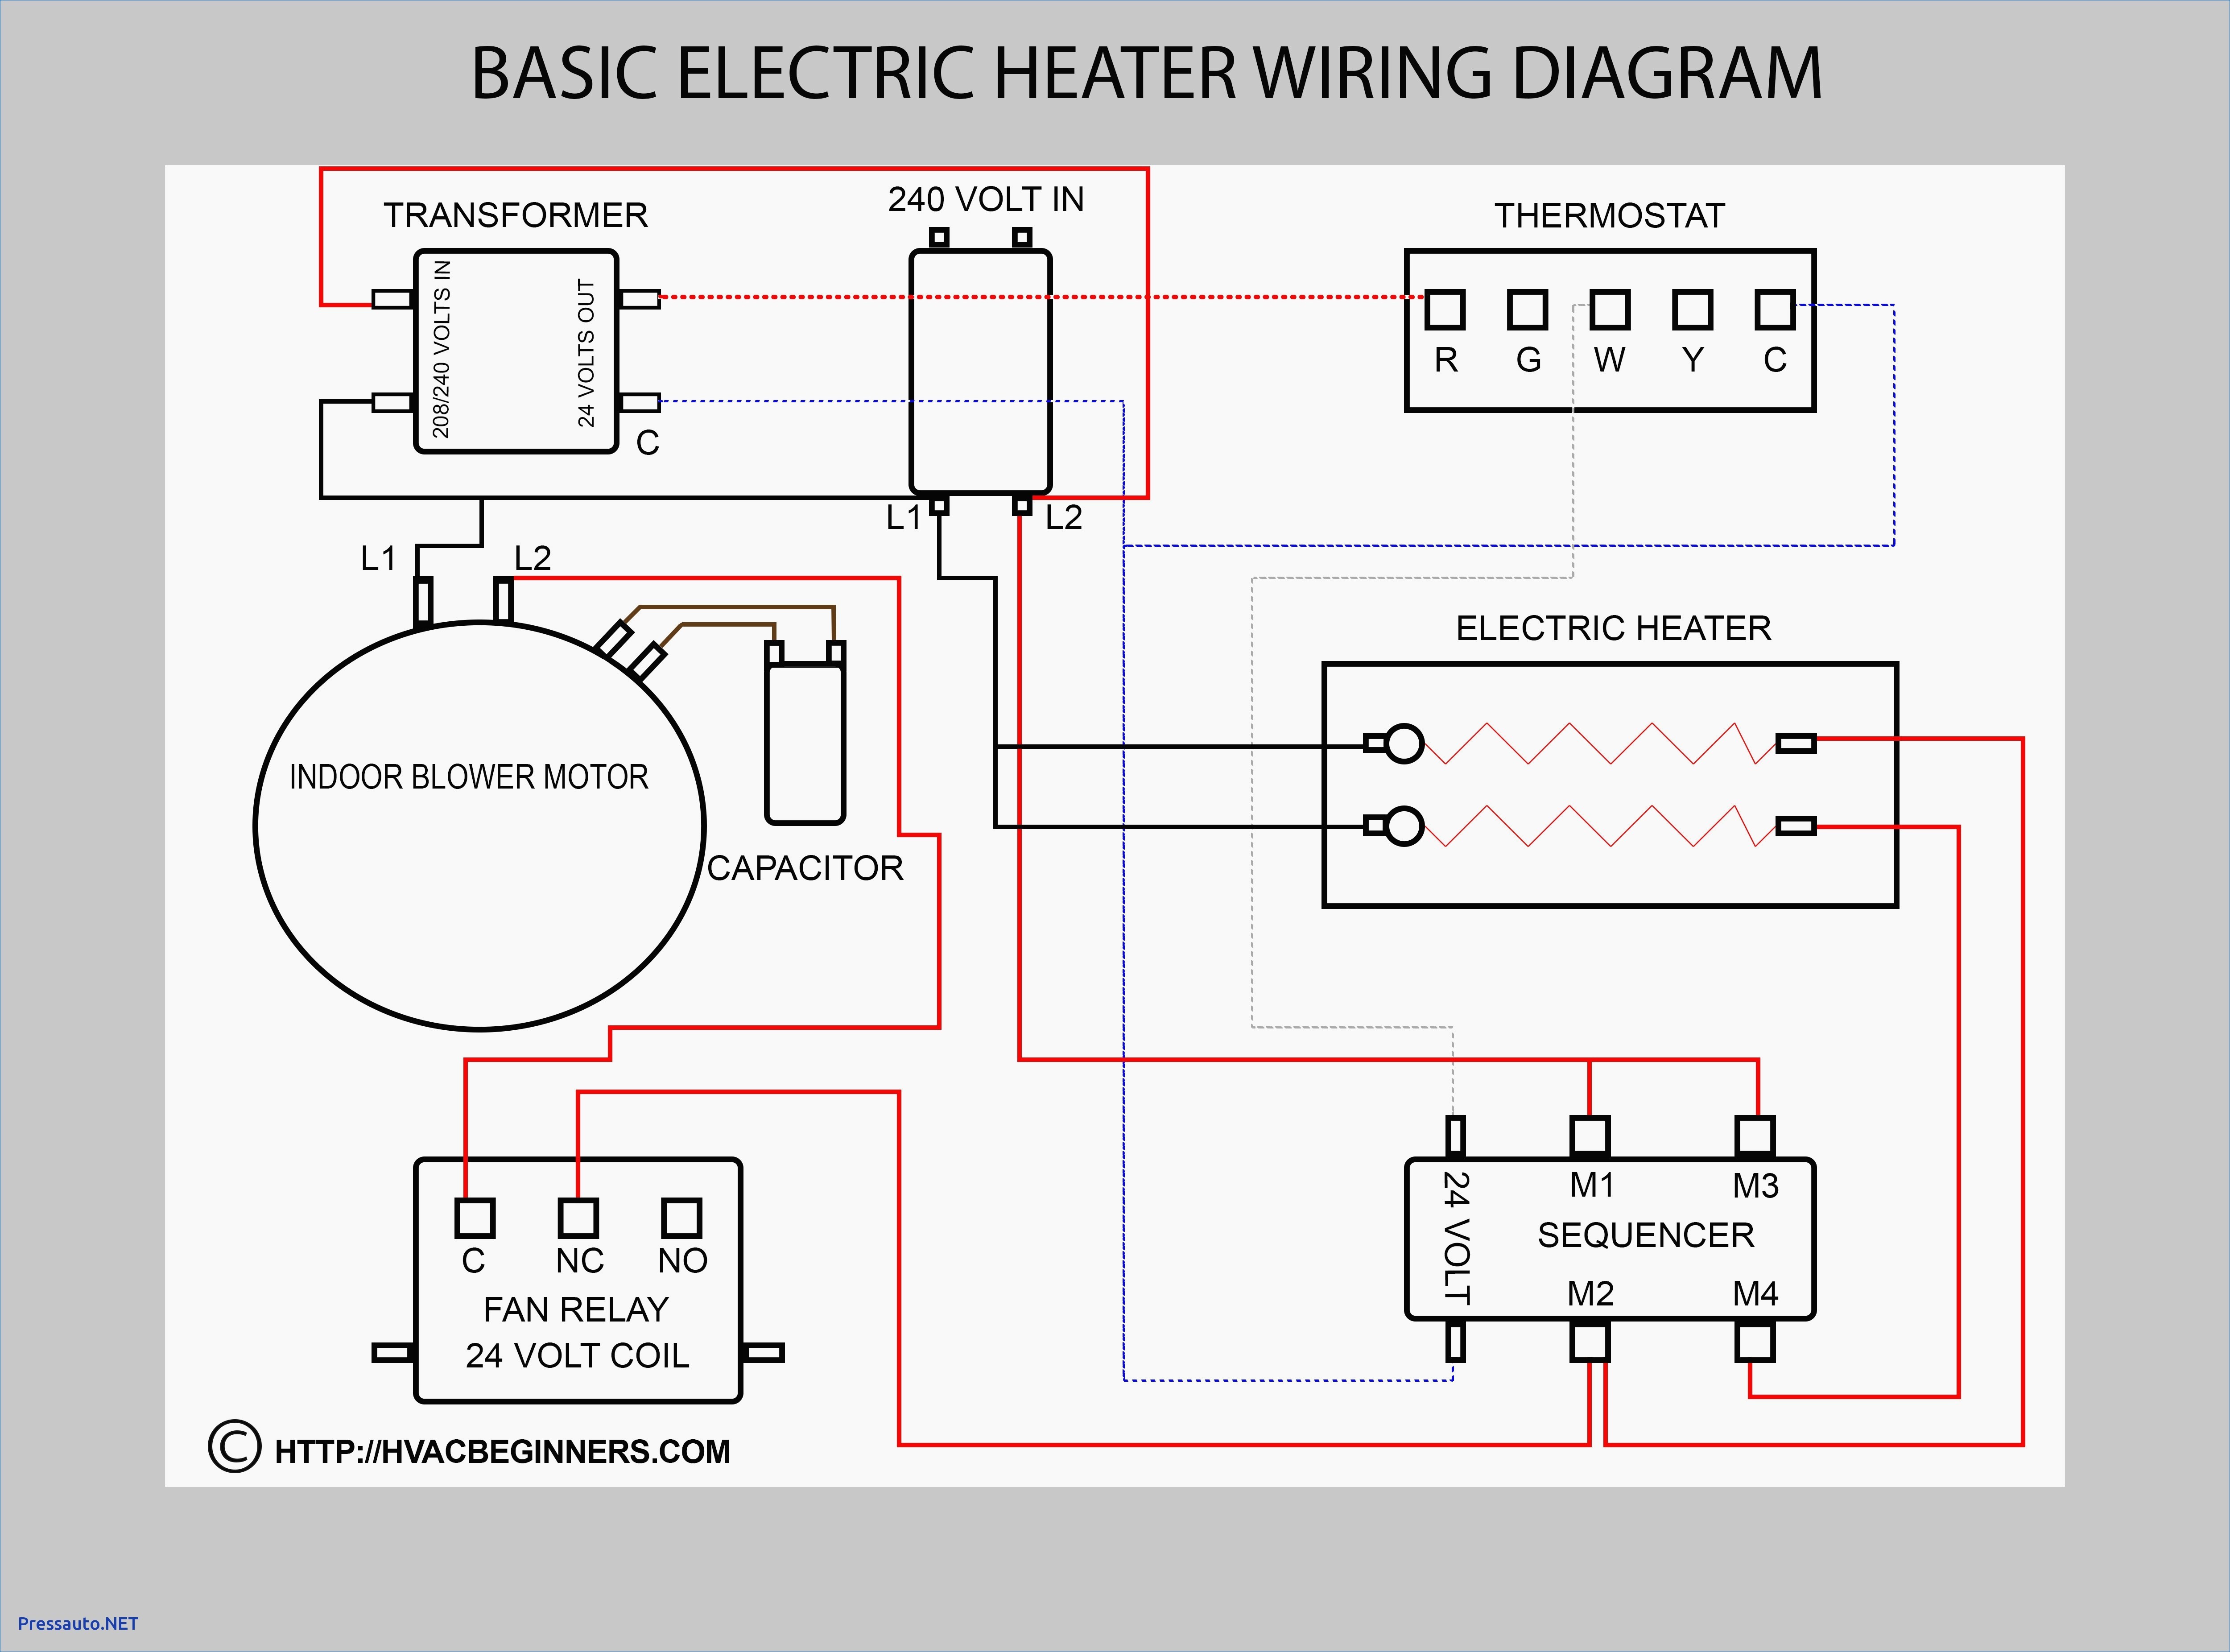 Square D Pressure Switch Wiring Diagram Water Pump Pressure Switch Wiring Diagram List Wiring Diagram for Of Square D Pressure Switch Wiring Diagram